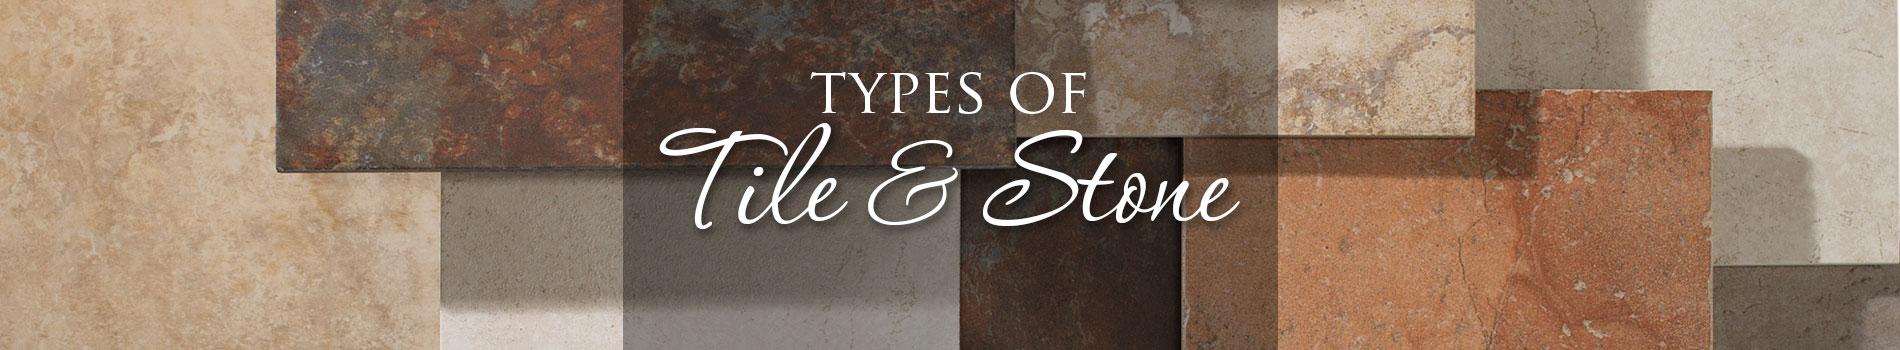 Types of Tile and Stone